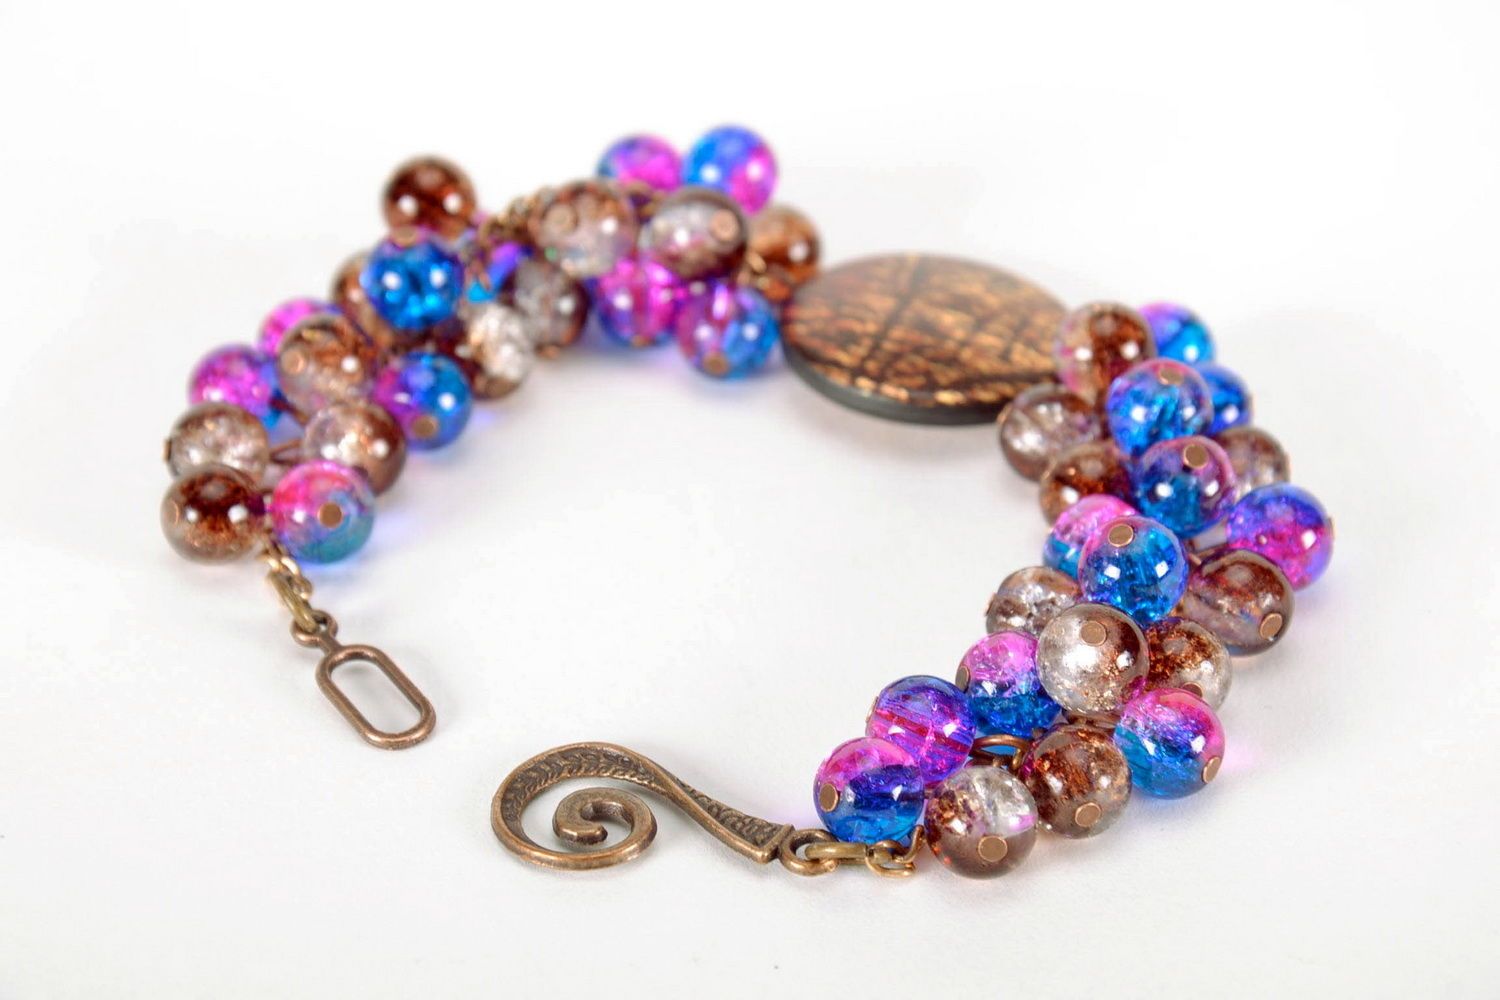 Handmade bracelet made from multi-colored beads photo 3